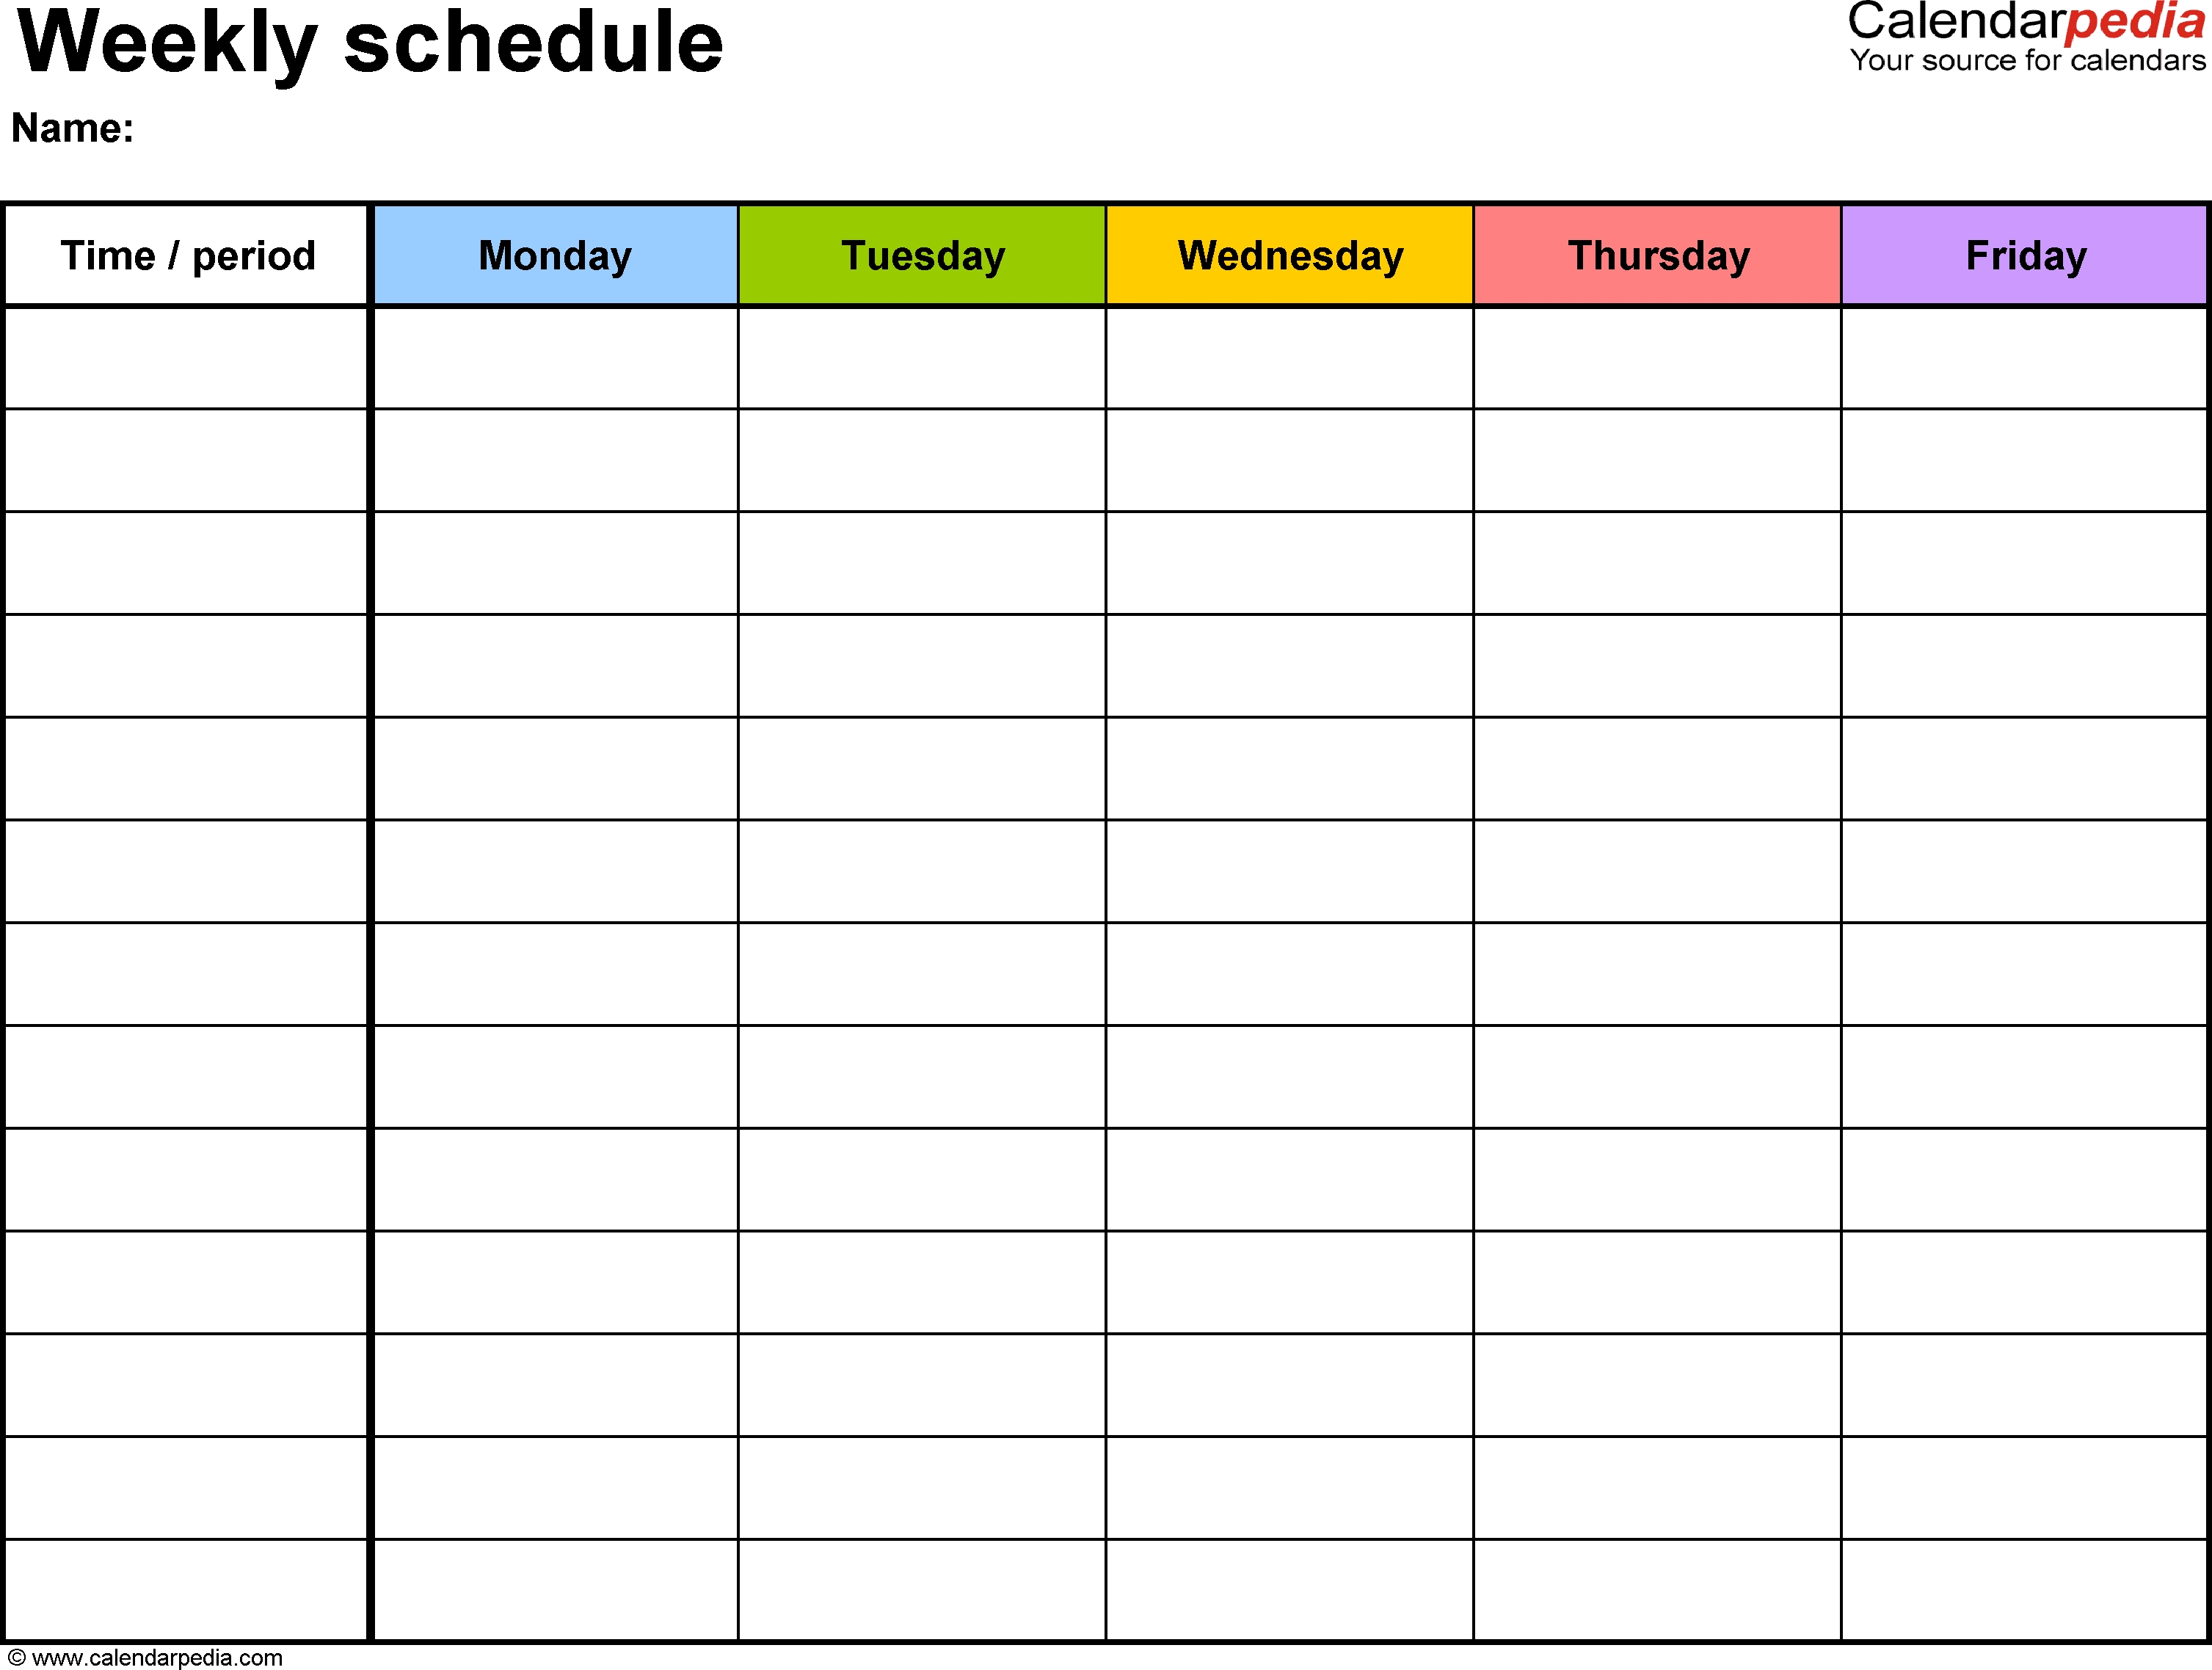 Free Weekly Schedule Templates For Excel - 18 Templates throughout Plan Calendar Template For 6 Weeks